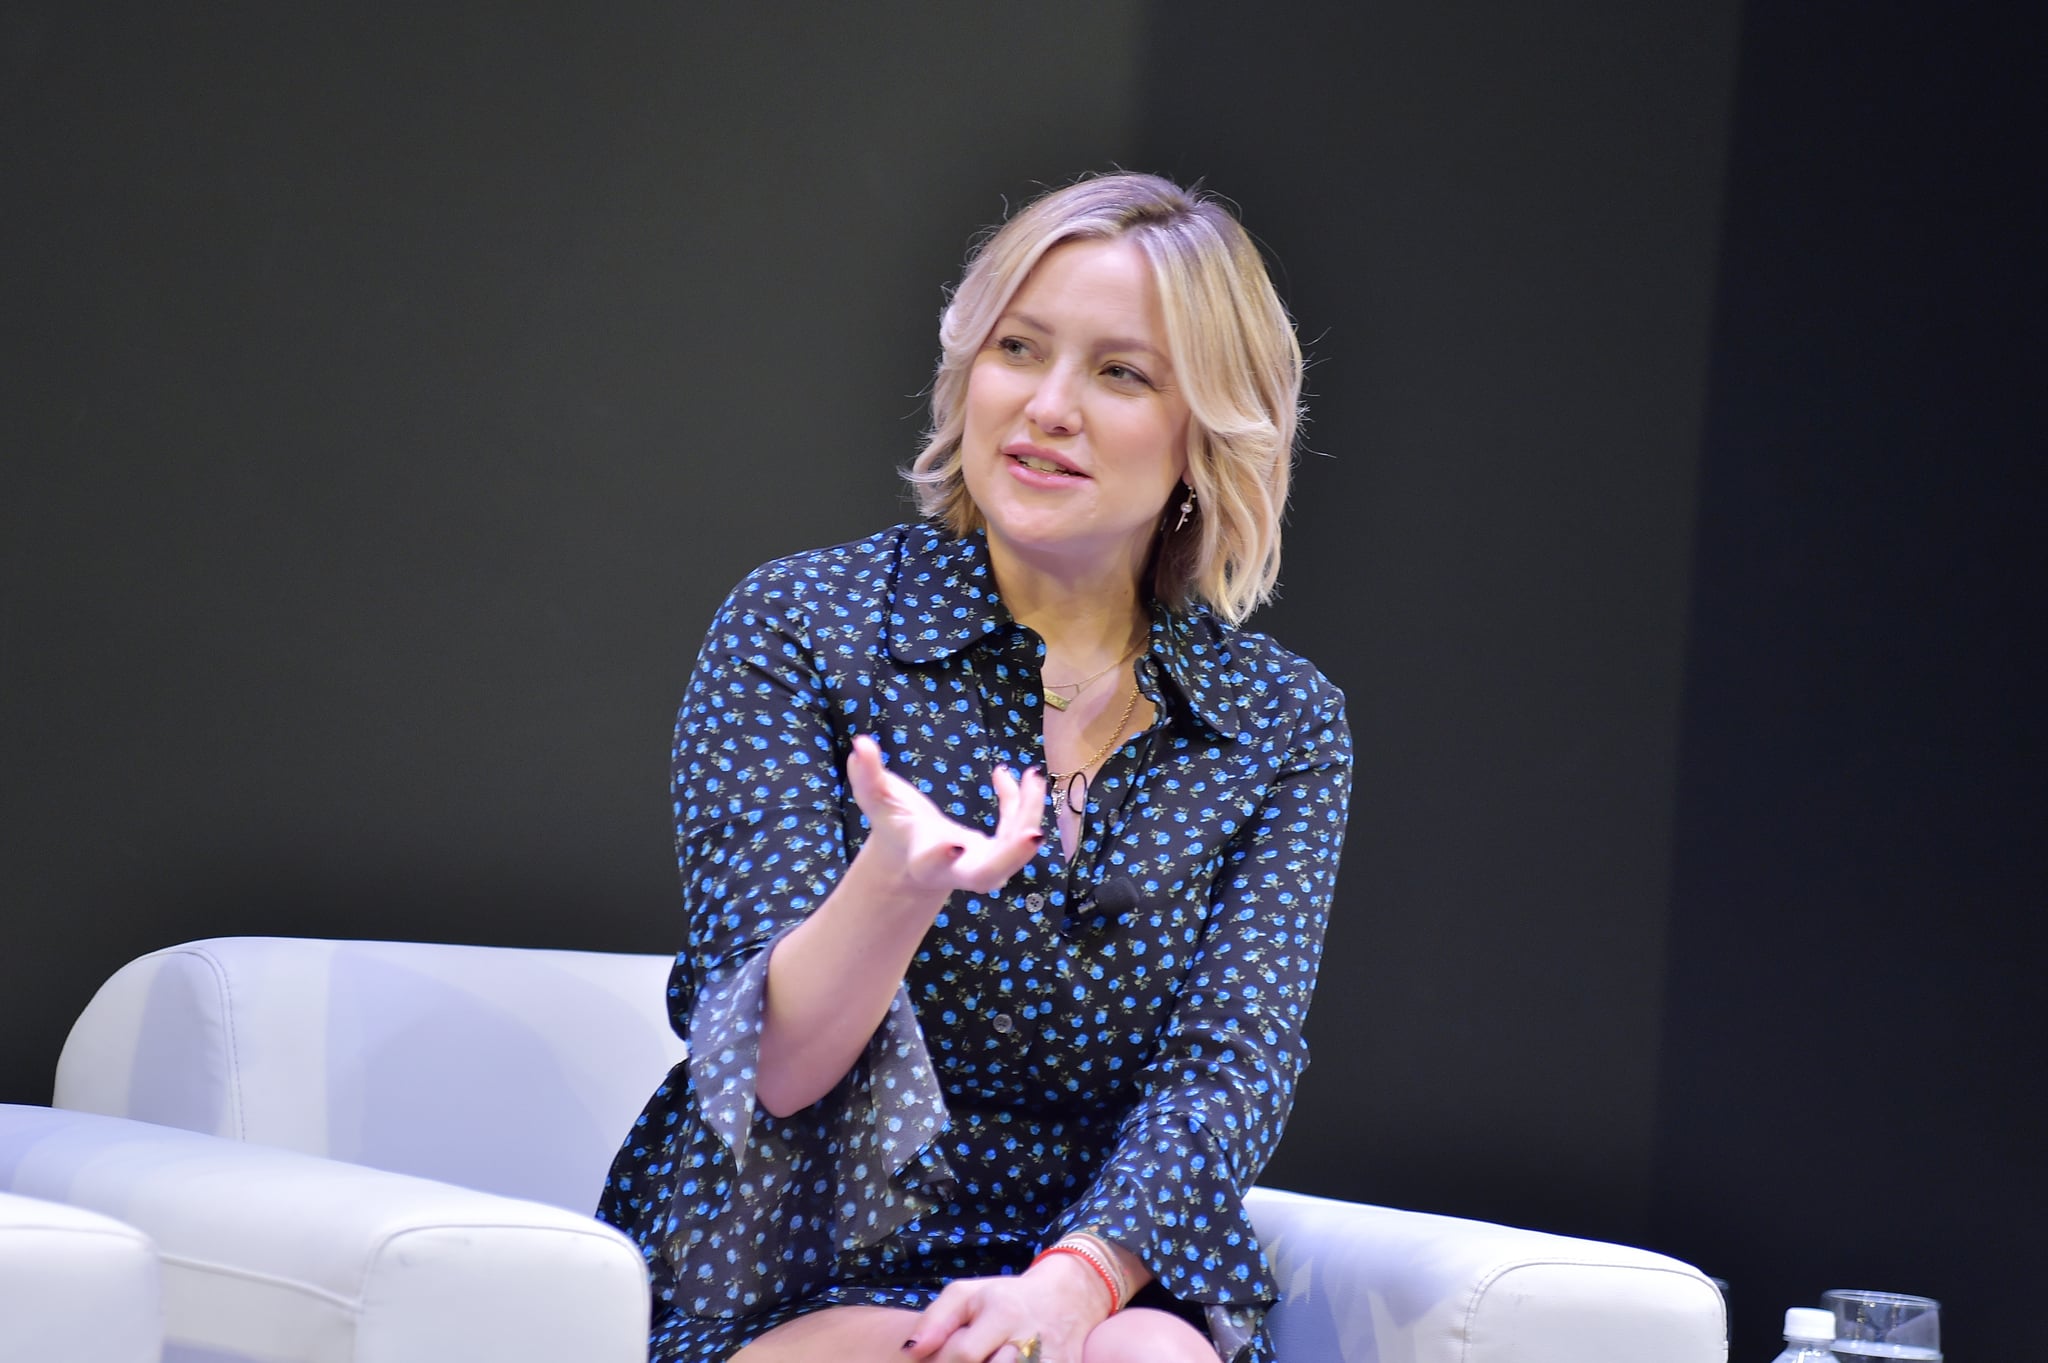 LOS ANGELES, CA - NOVEMBER 07:  Kate Hudson speaks onstage during In Conversation with Michael Kors, Kate Hudson and The World Food Programme at UCLA on November 7, 2018 in Los Angeles, California.  (Photo by Stefanie Keenan/Getty Images for Michael Kors)